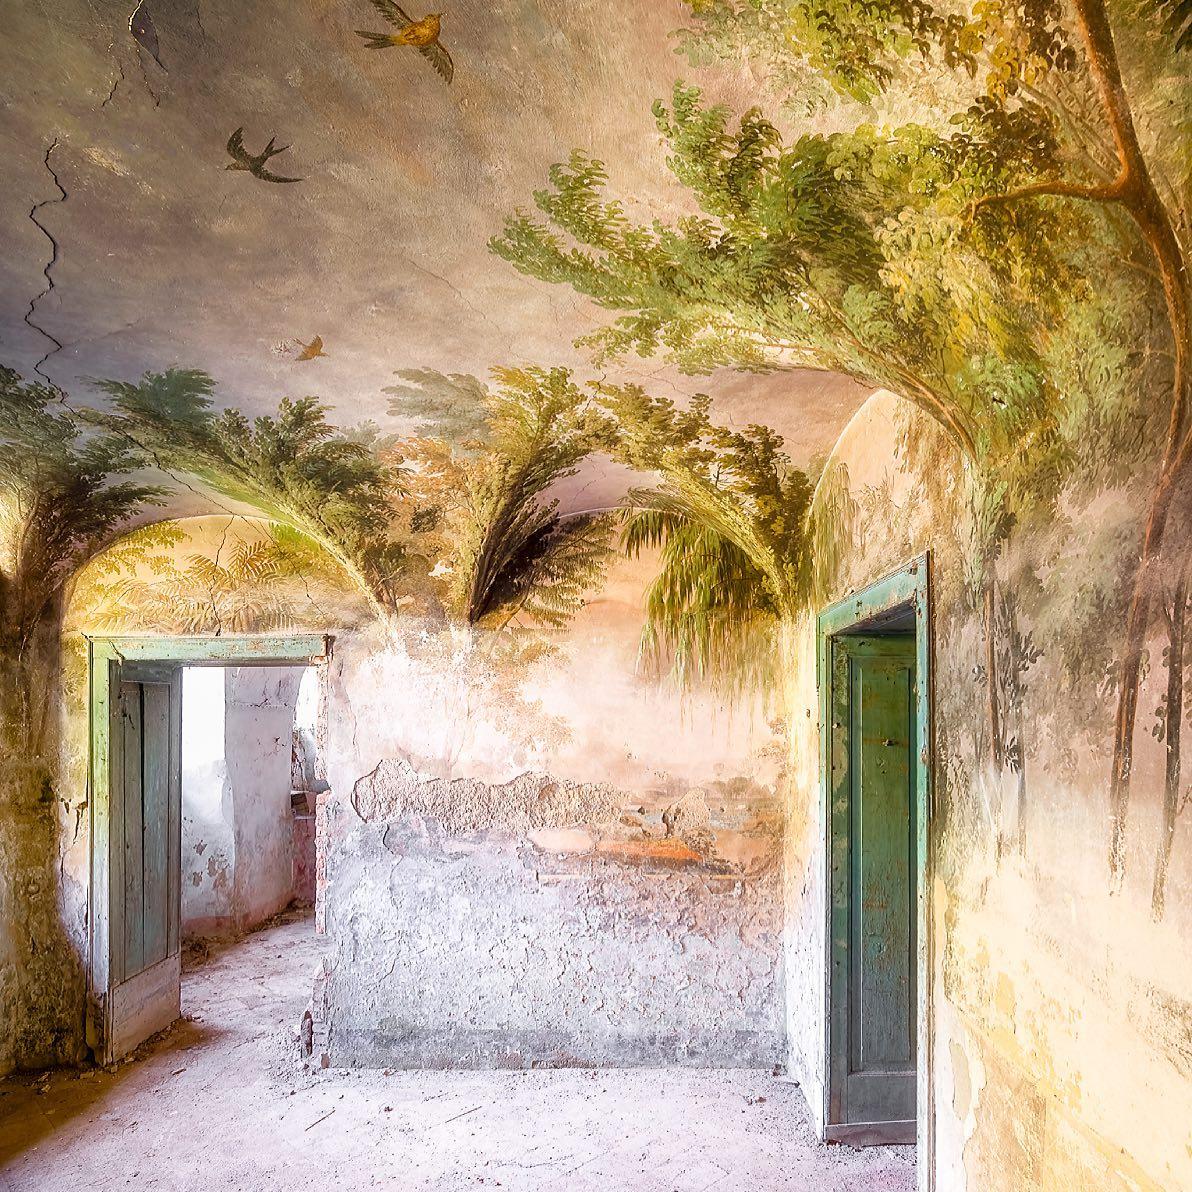 An abandoned villa in Northern Italy, photographed in 2020. (Courtesy of <a href="https://romanrobroek.nl/">Roman Robroek Photography</a> and <a href="https://www.instagram.com/romanrobroek/">@romanrobroek</a>)